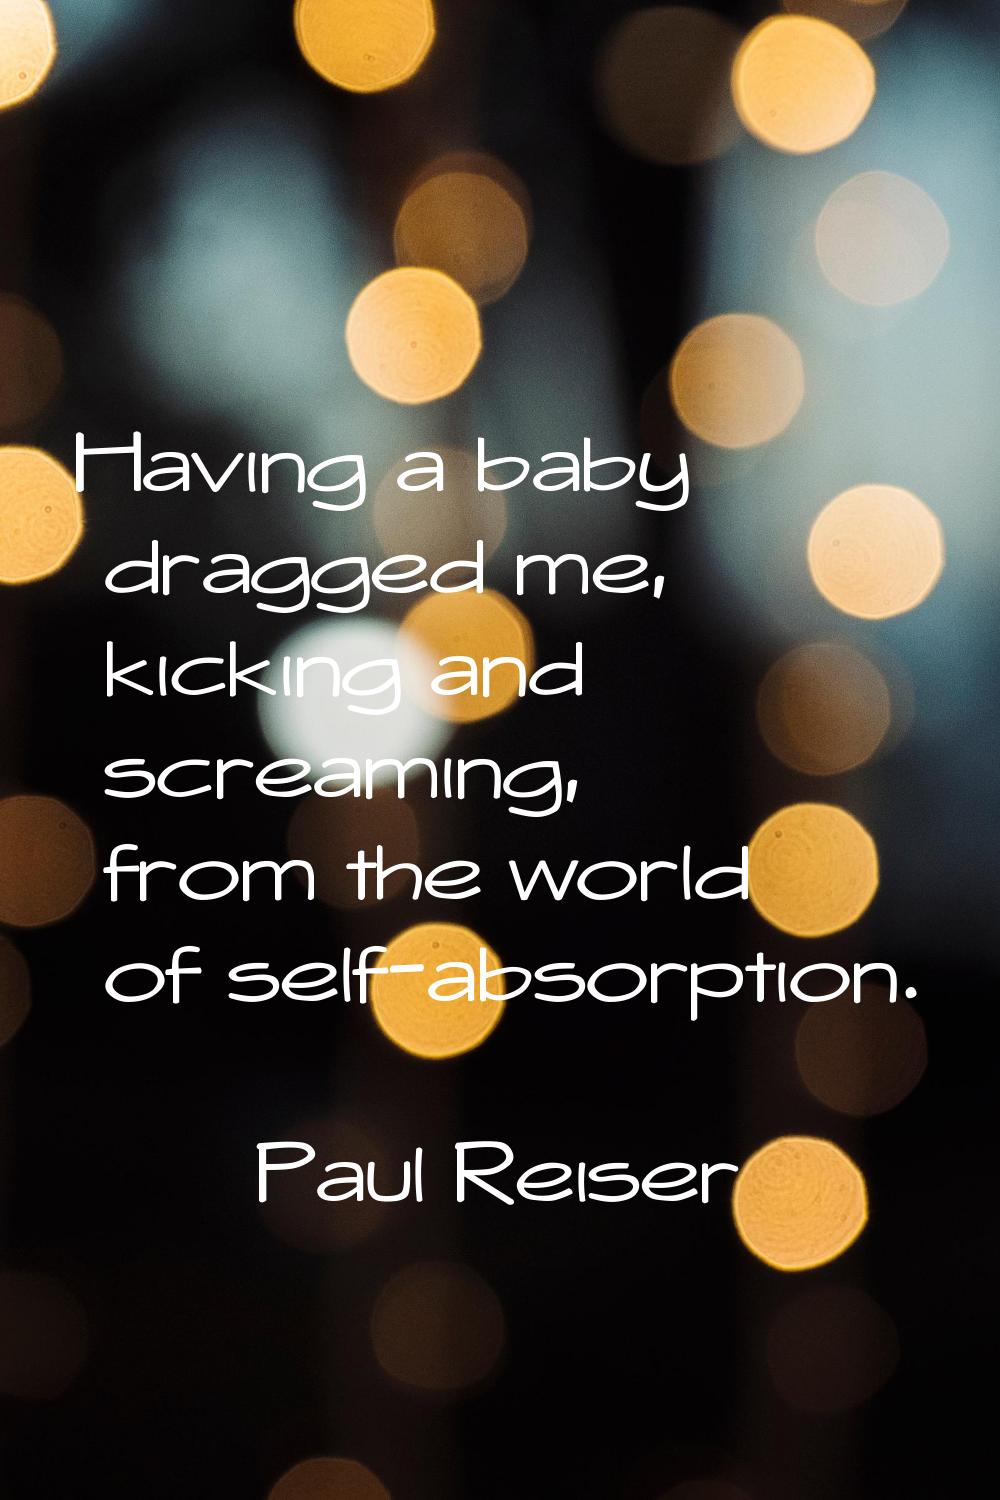 Having a baby dragged me, kicking and screaming, from the world of self-absorption.